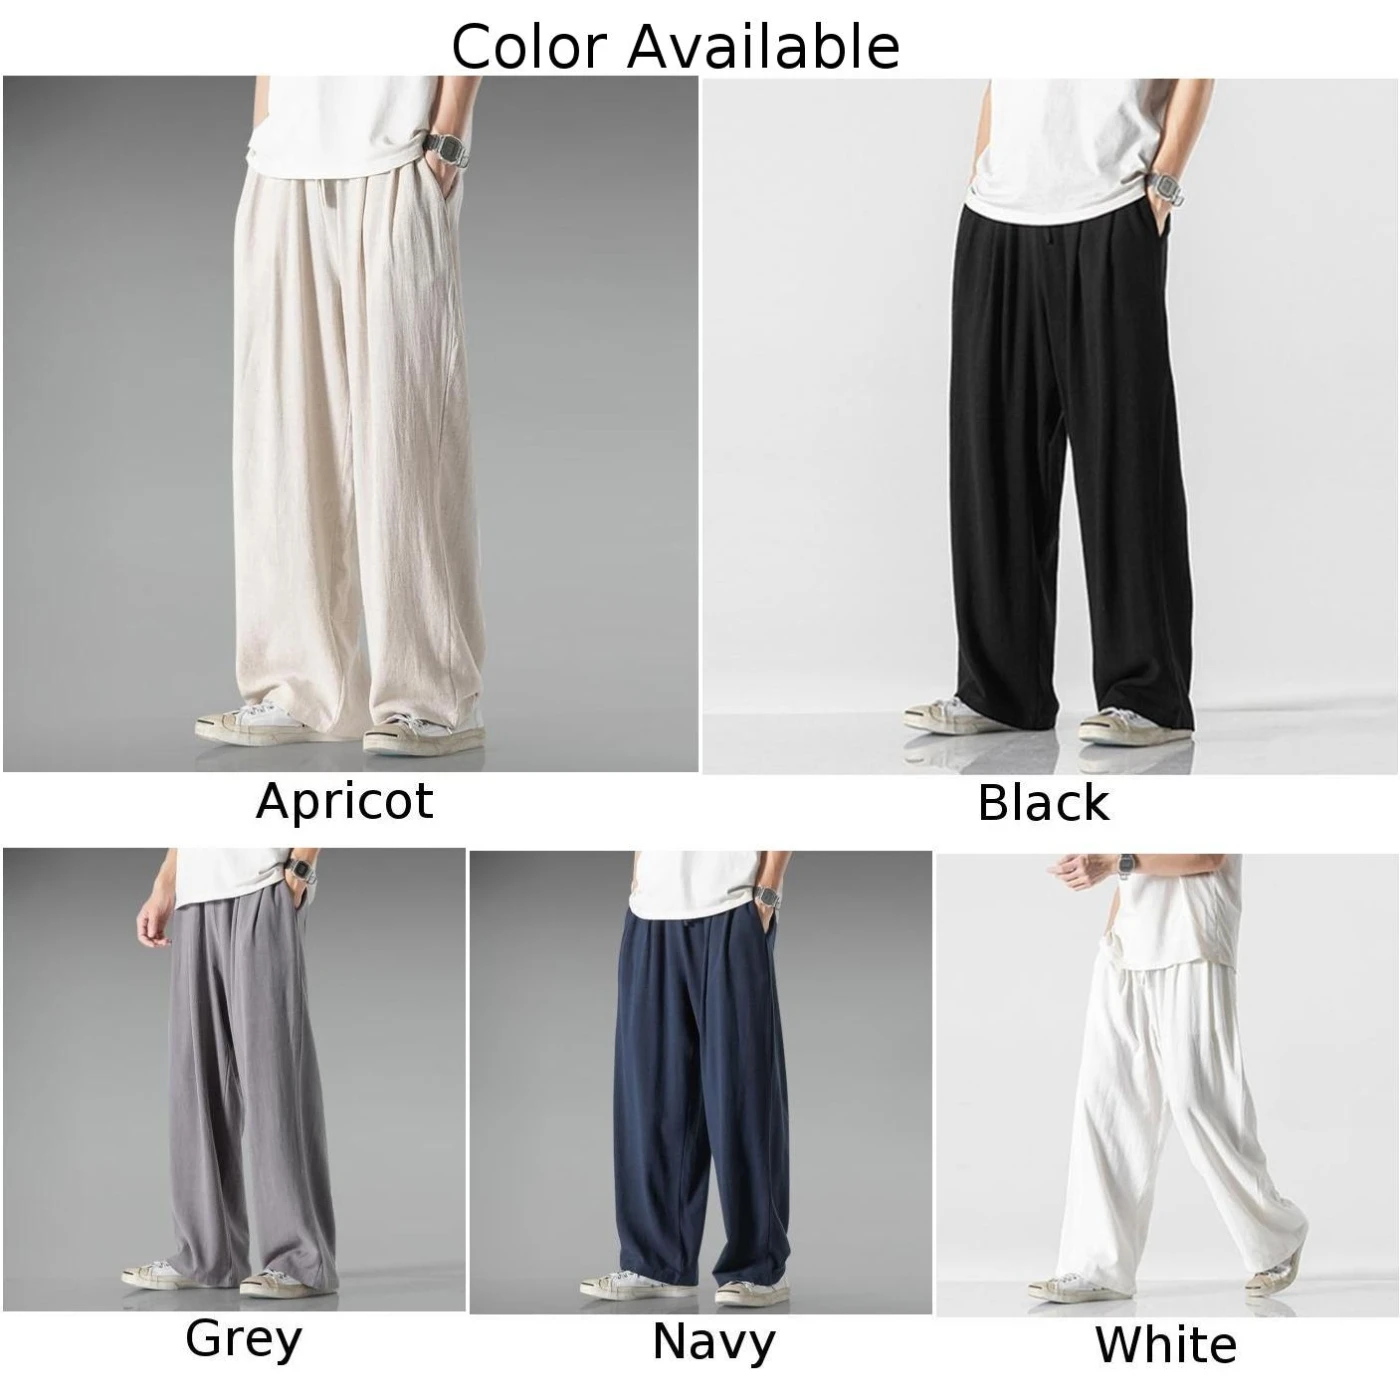 Men\'s Casual Baggy Pants Elastic Waist Straight Trousers in Solid Color Options (Black/Grey/Apricot/White/Navy)